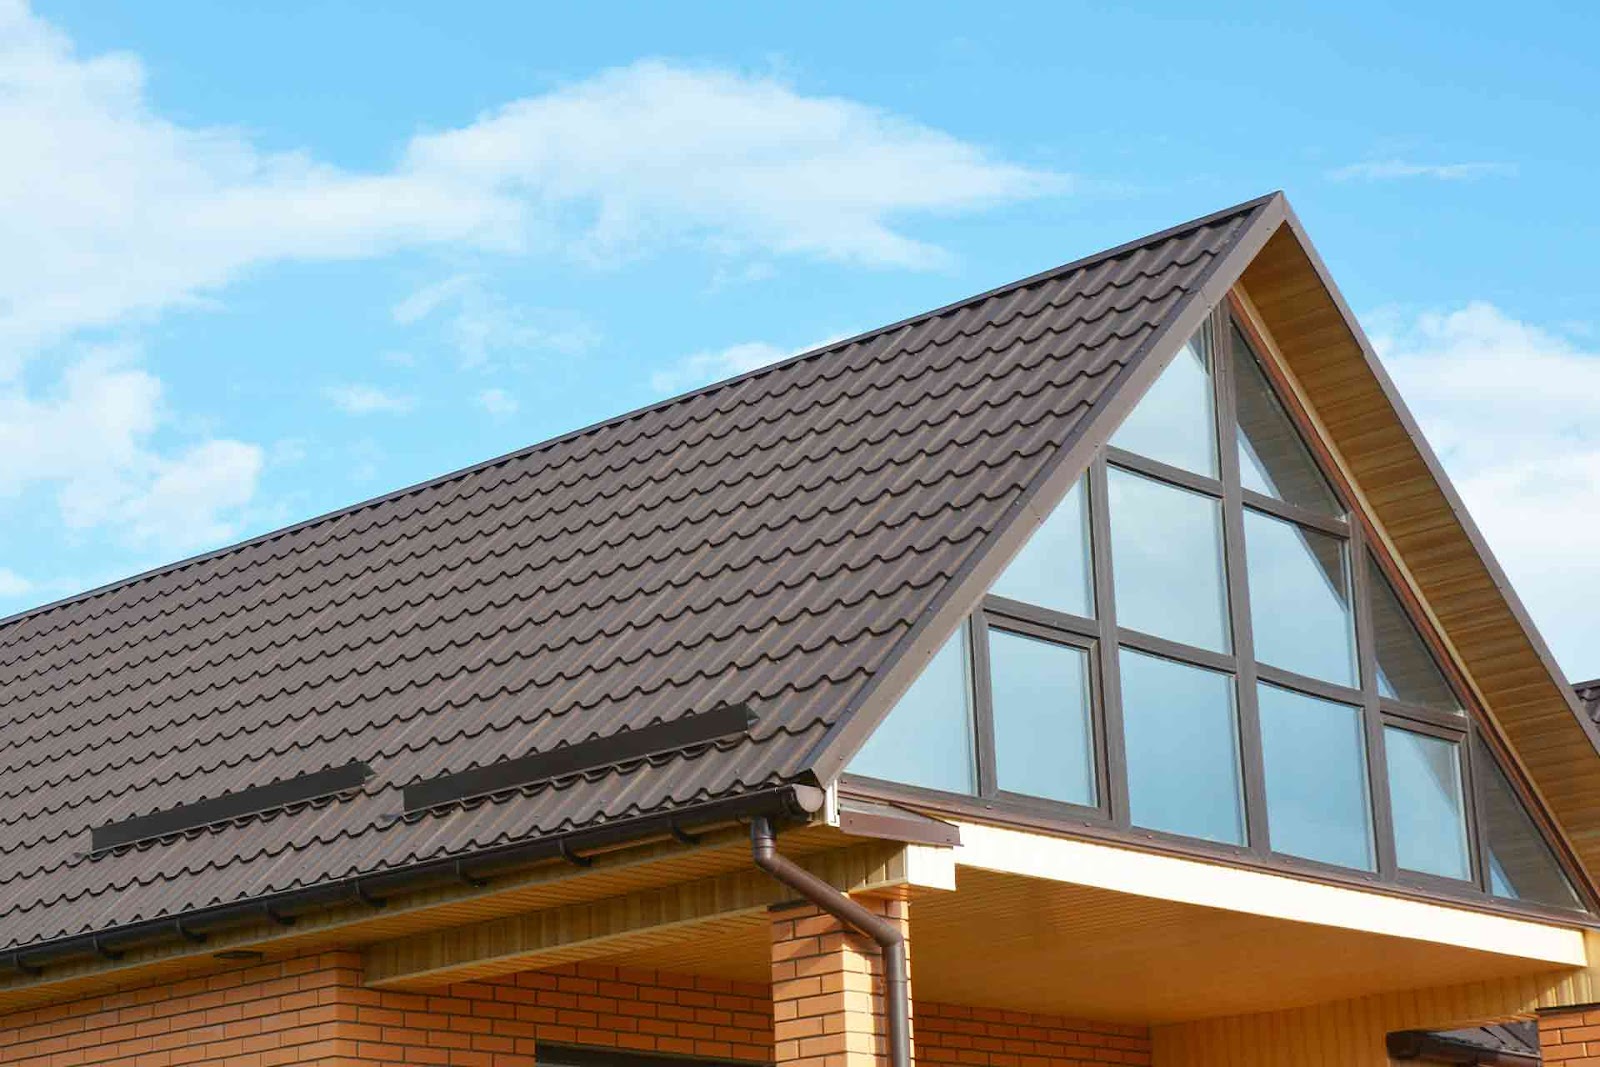 Which Roof Type, Flat or Pitched, is Best for the Pacific Northwest